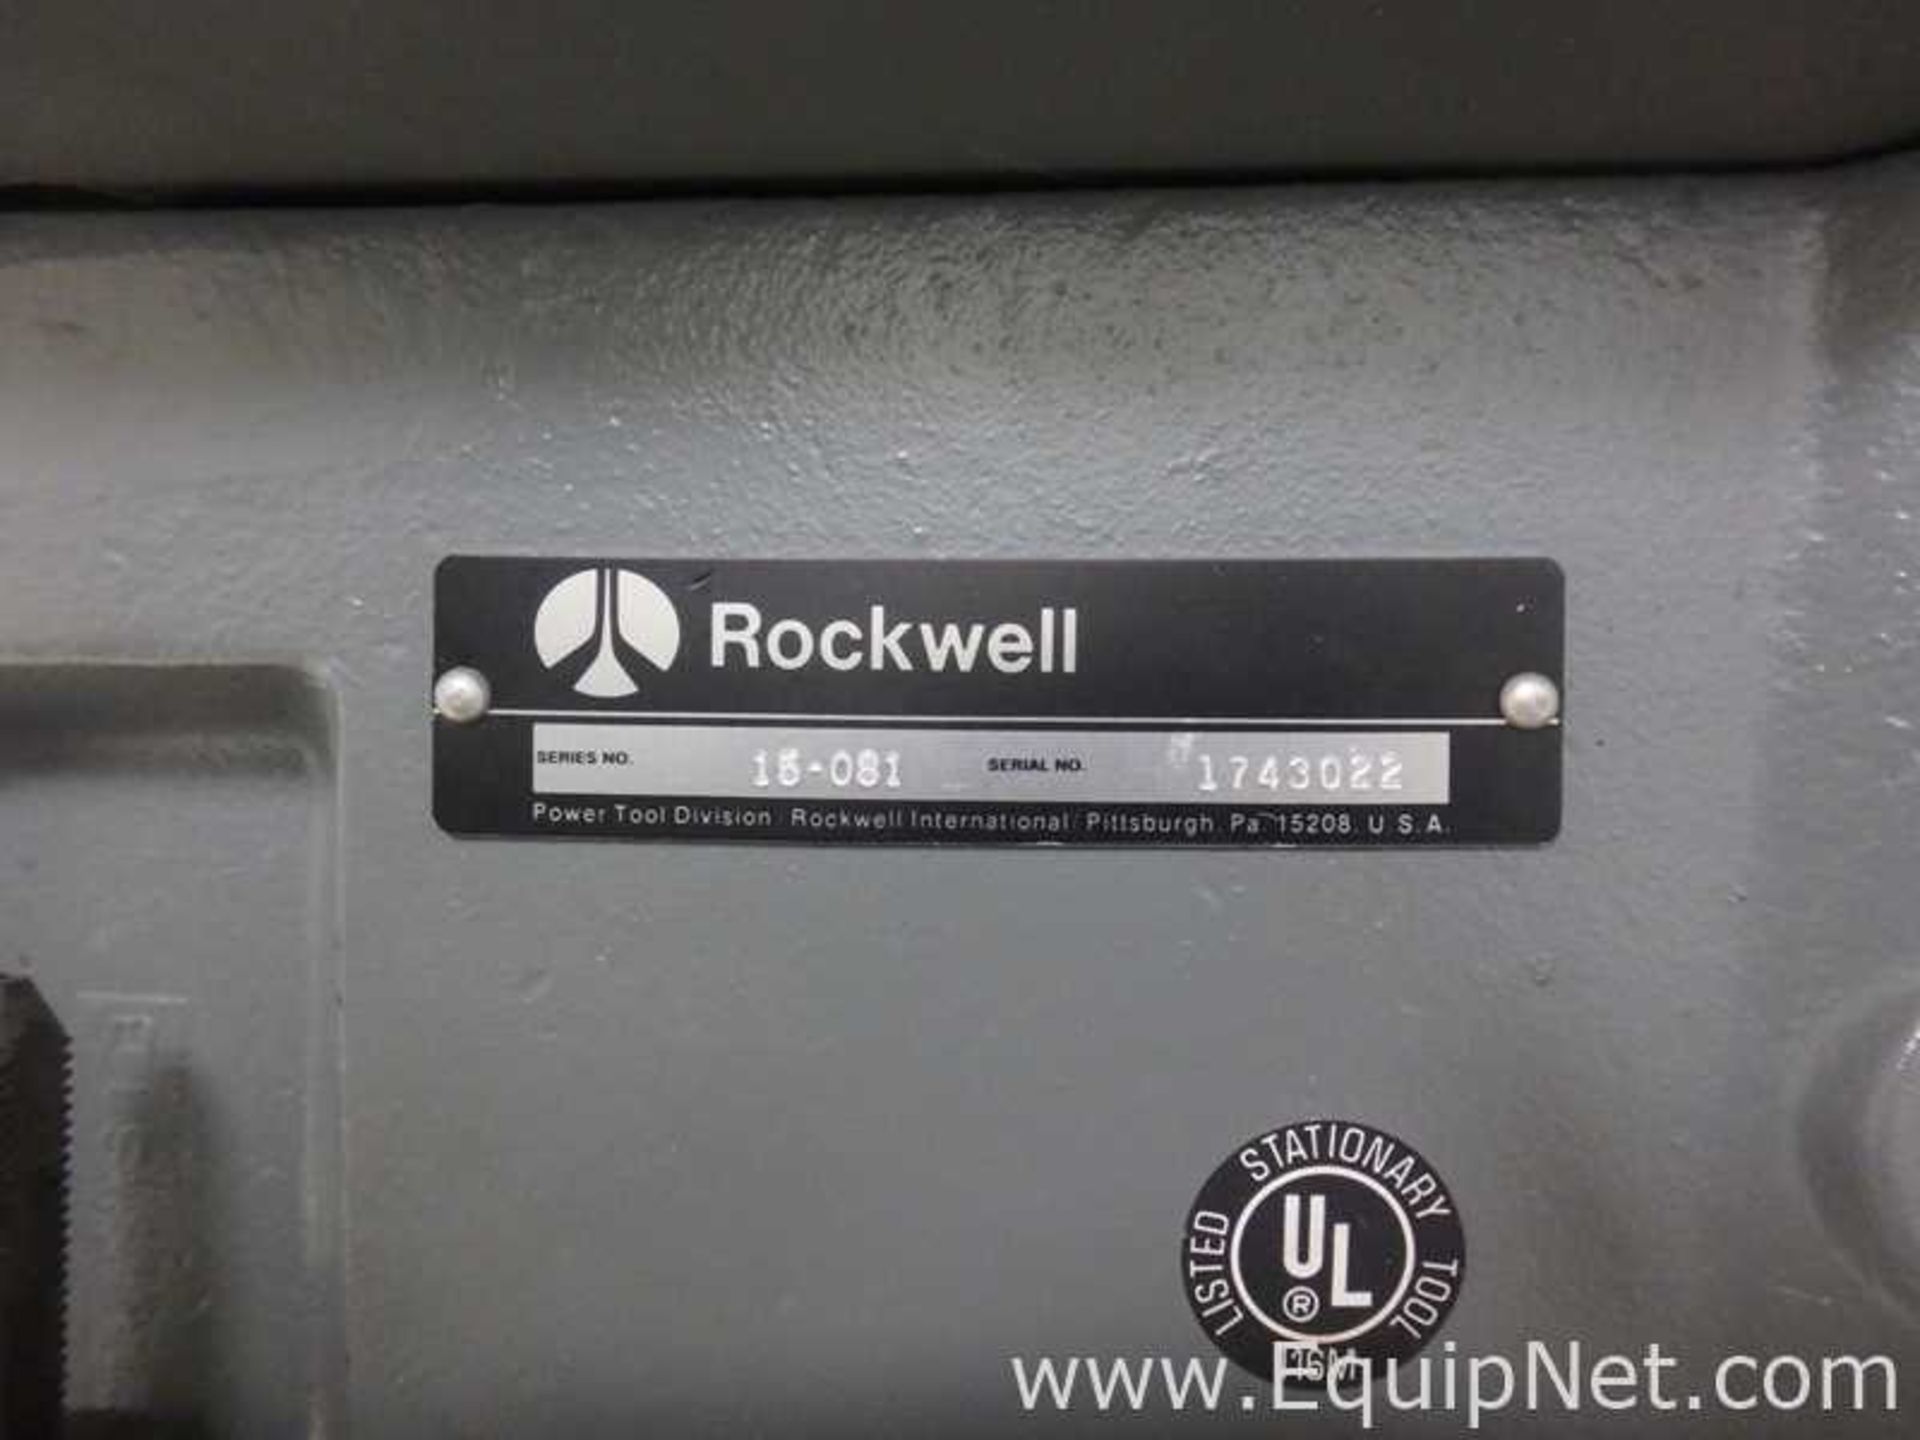 Rockwell Automation 15-081 Drill Press - Image 4 of 6